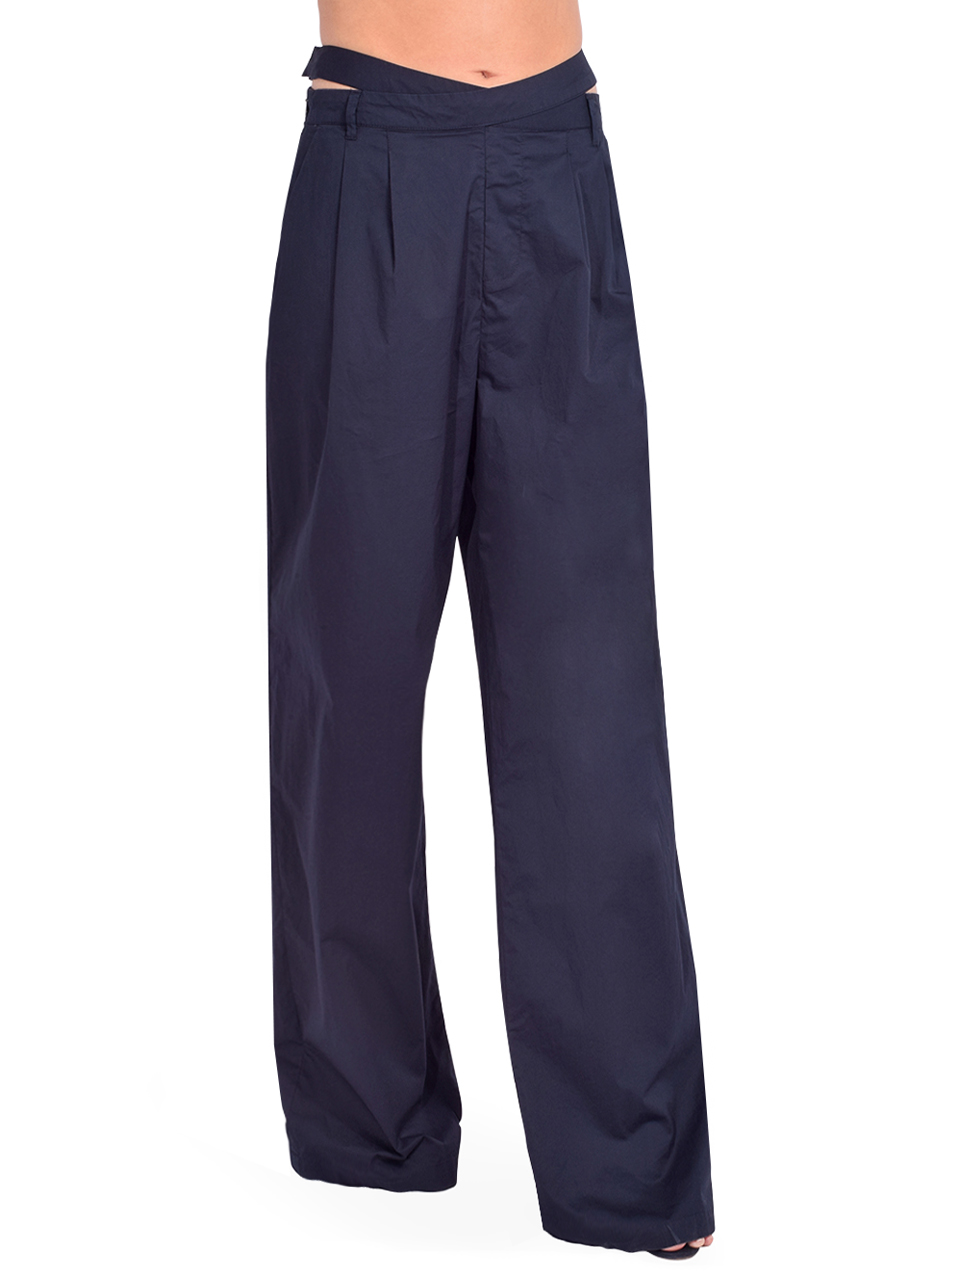 OSIS Jenna Pant in Navy Side View 